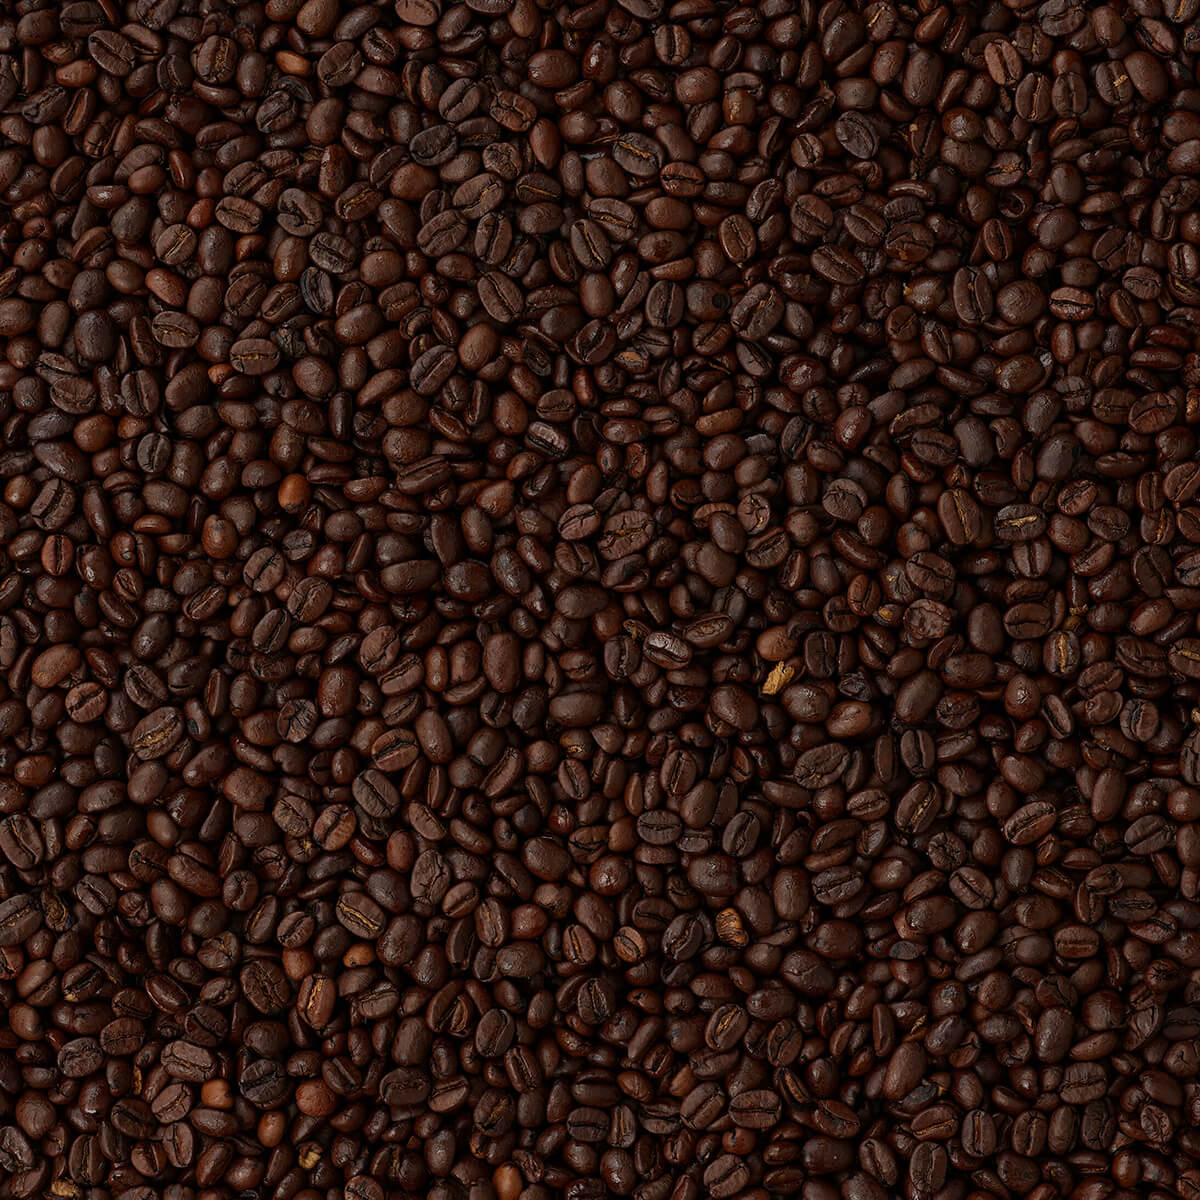 Mix of coffee beans